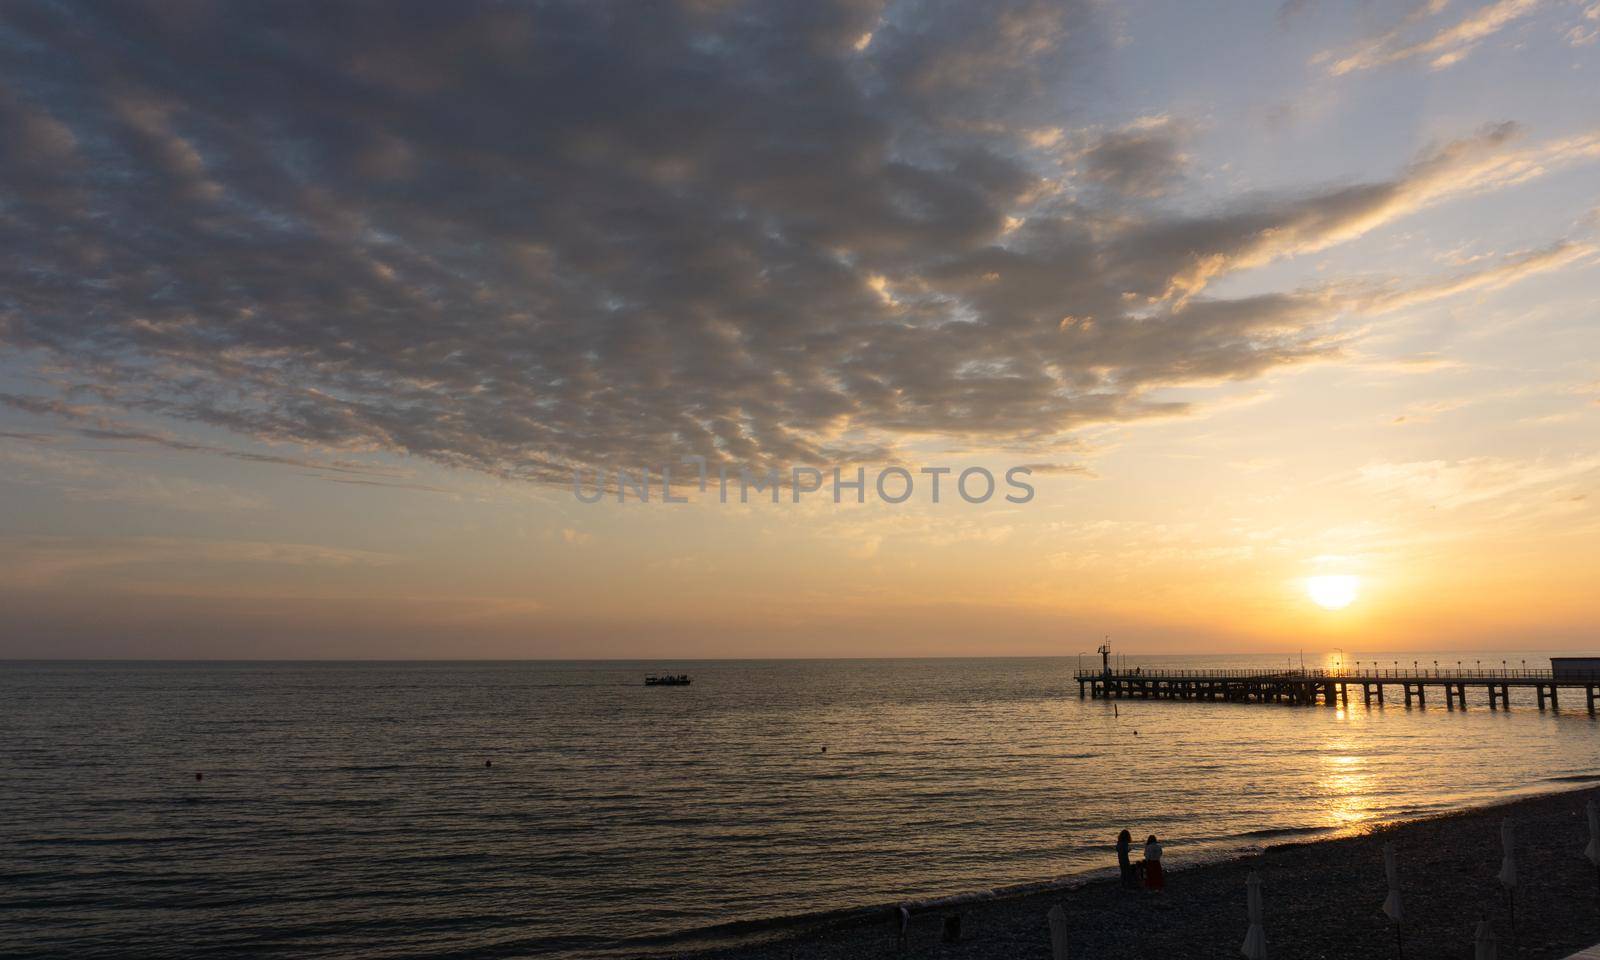 LAZAREVSKOE, SOCHI, RUSSIA - MAY, 26, 2021: Orange saturated sunset with silhouettes of people on the background of the sun. Lazarevskoe, Sochi, Russia by Asnia